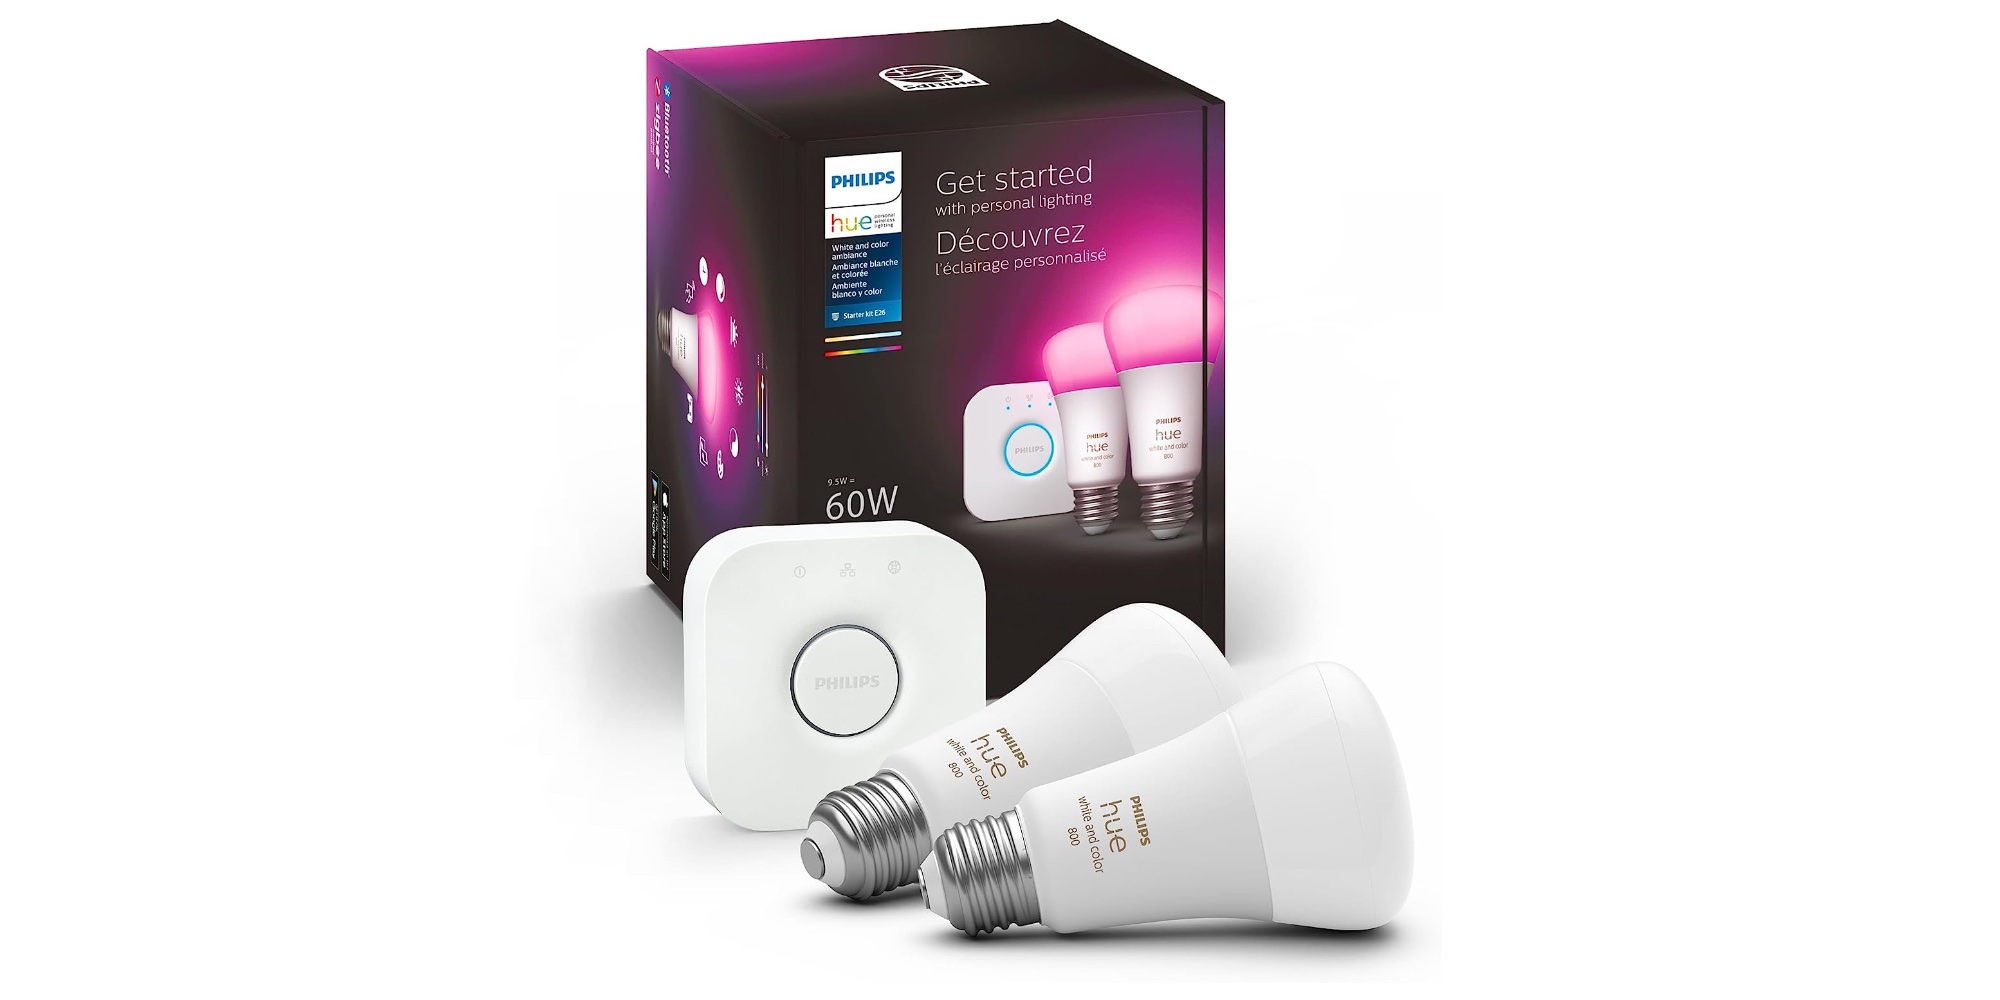 This HomeKit Philips Hue starter set includes two color bulbs and